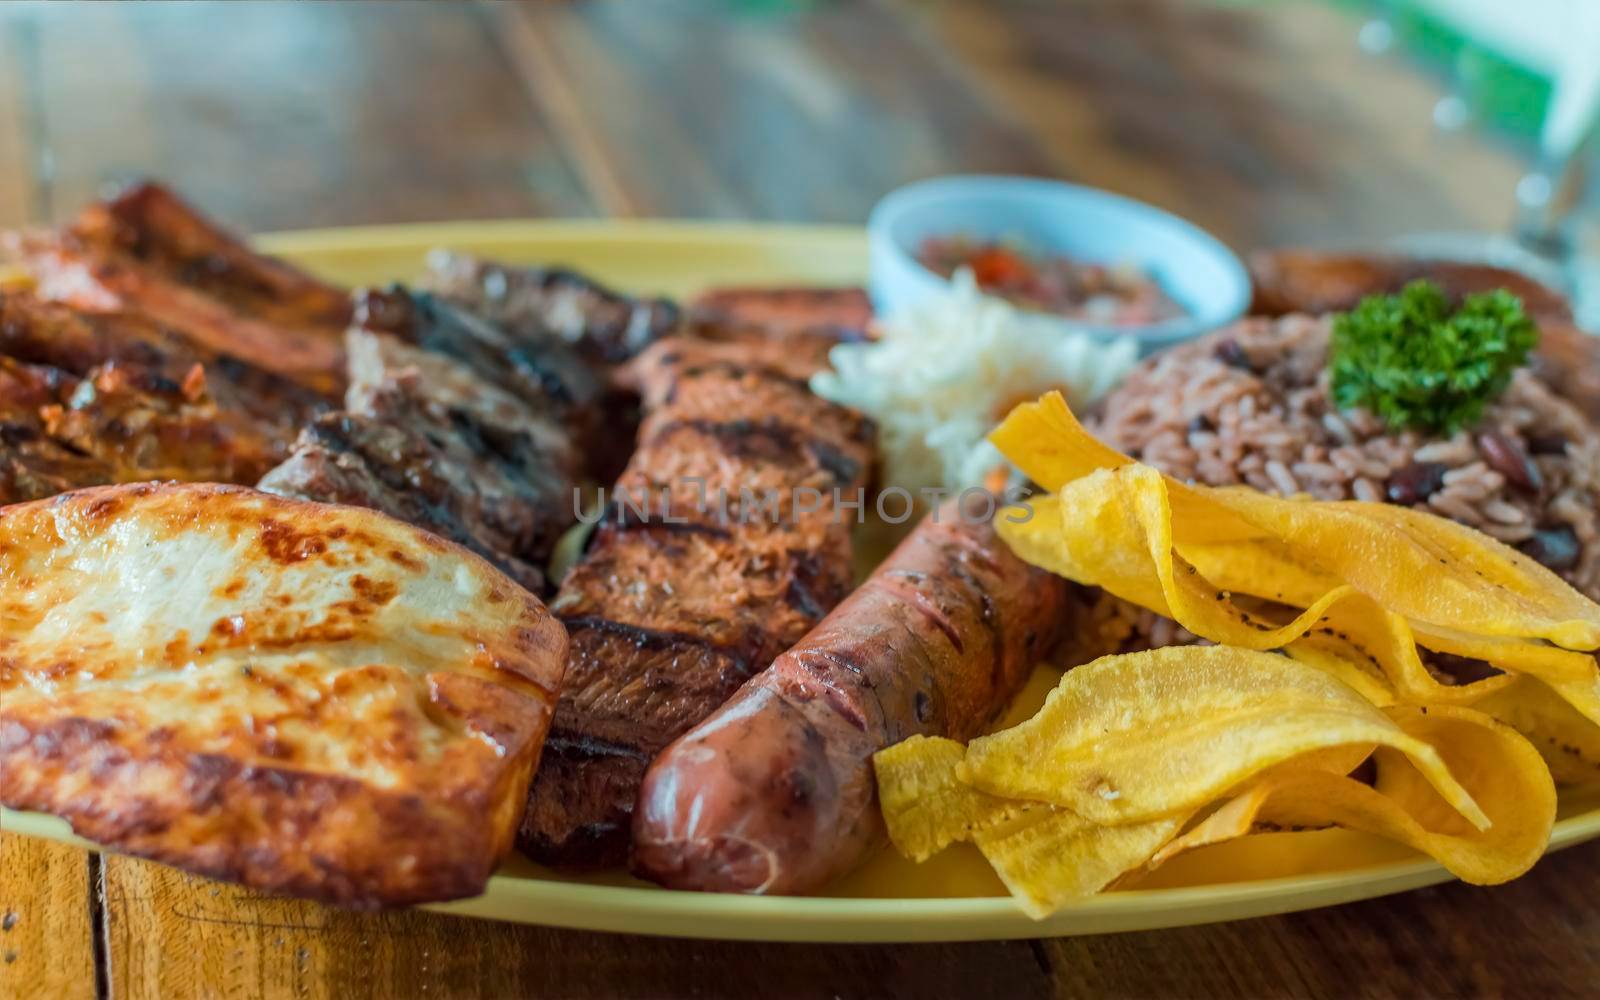 Variety of fried and grilled meats served on wooden table. Traditional Nicaraguan bay horse served on the table. Variety of food meats and assortment of sausages